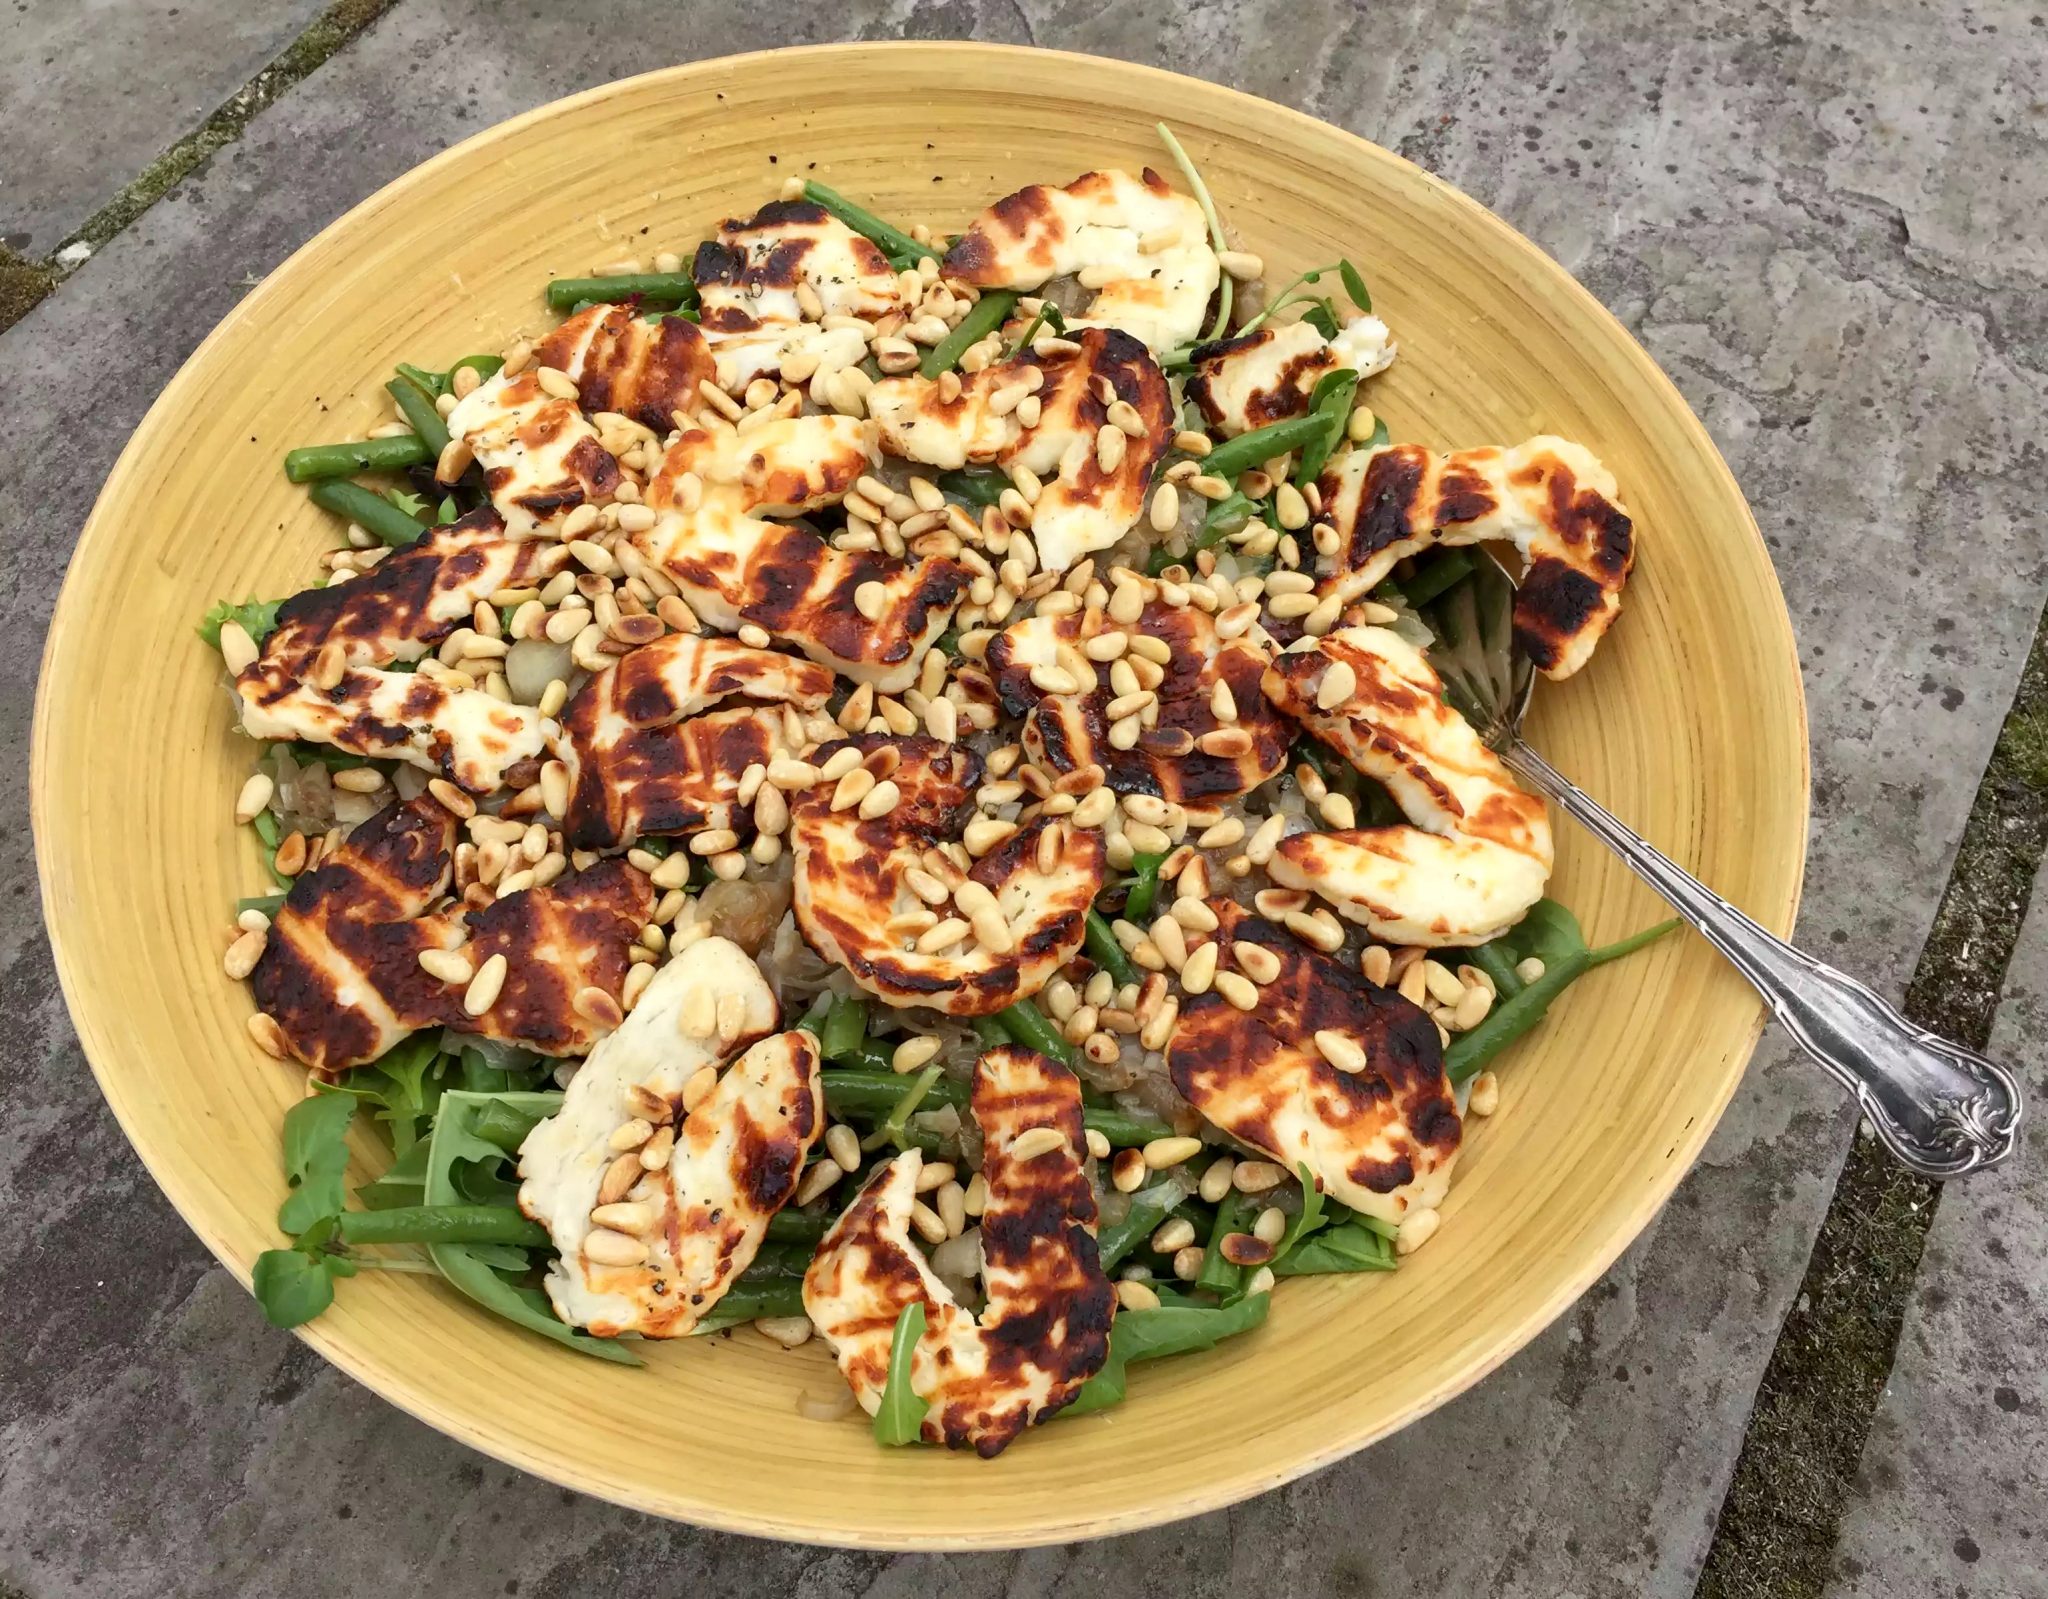 Grilled Halloumi, French Beans, Caramelised Shallots, Pine Nuts Salad Lime Dressing SCD Grain-Free Gluten-Free Paleo Clean Eating